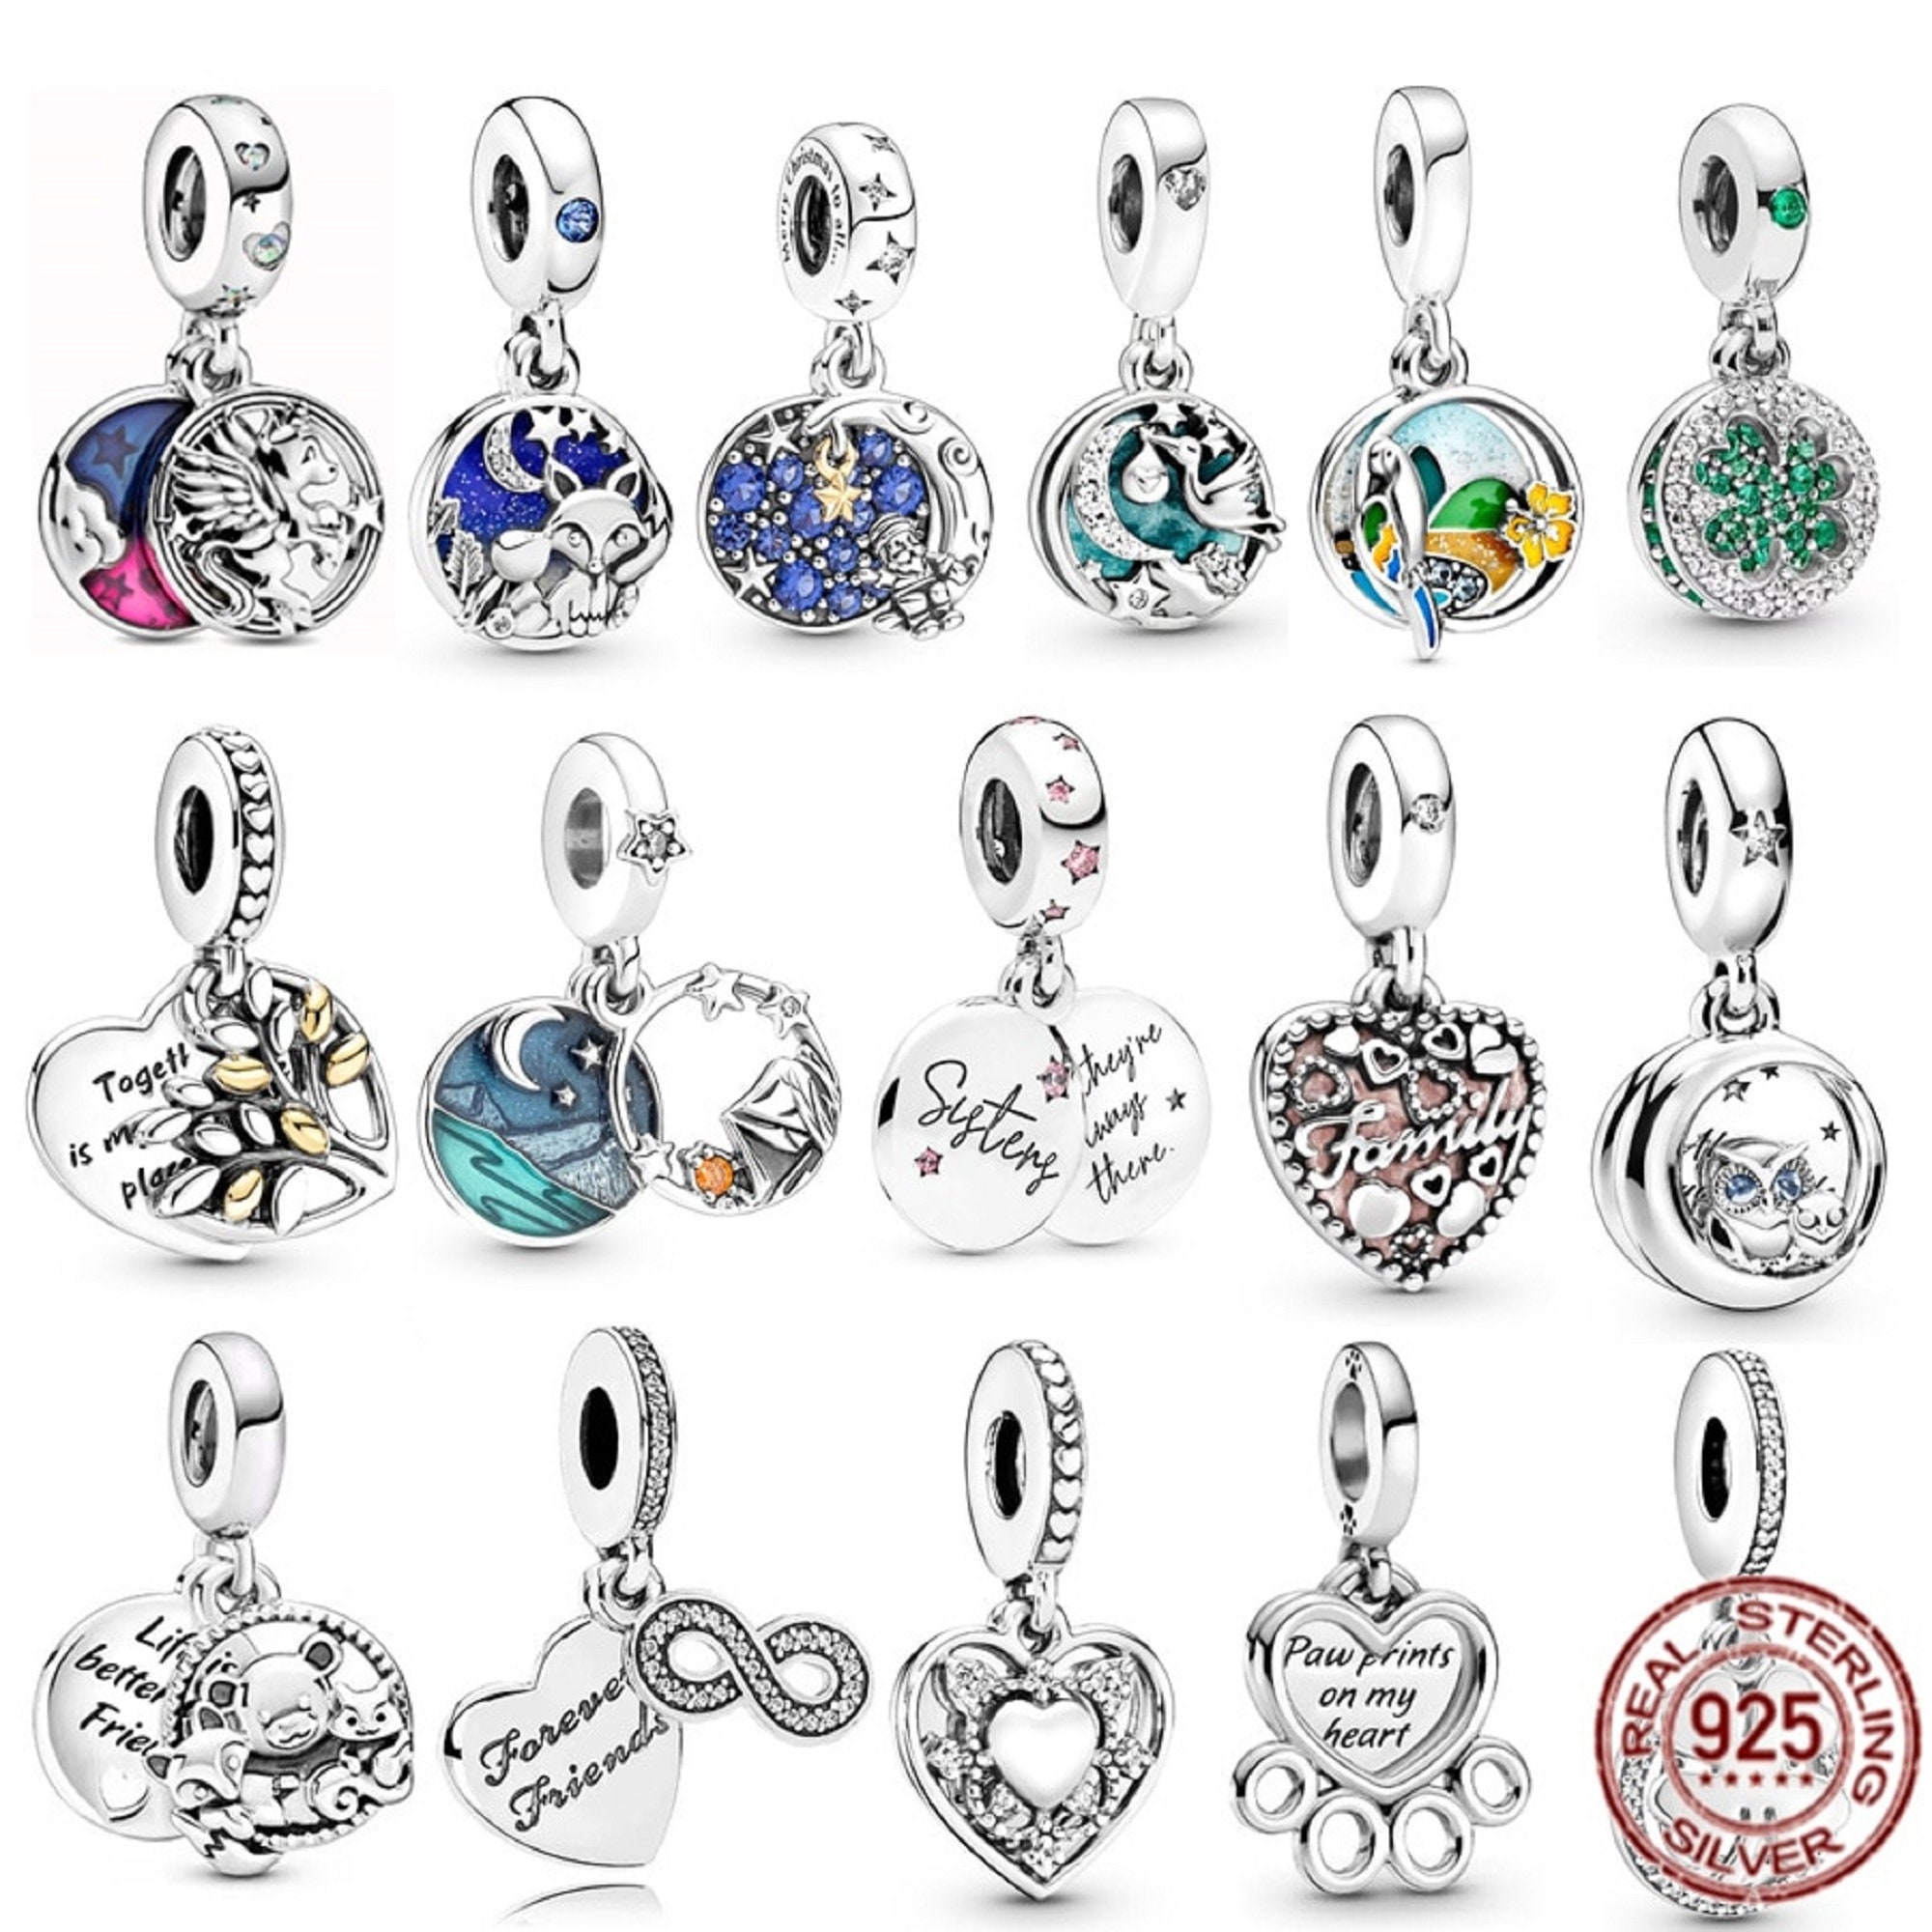 Disney's The Little Mermaid Seashell Necklace and Earrings Set